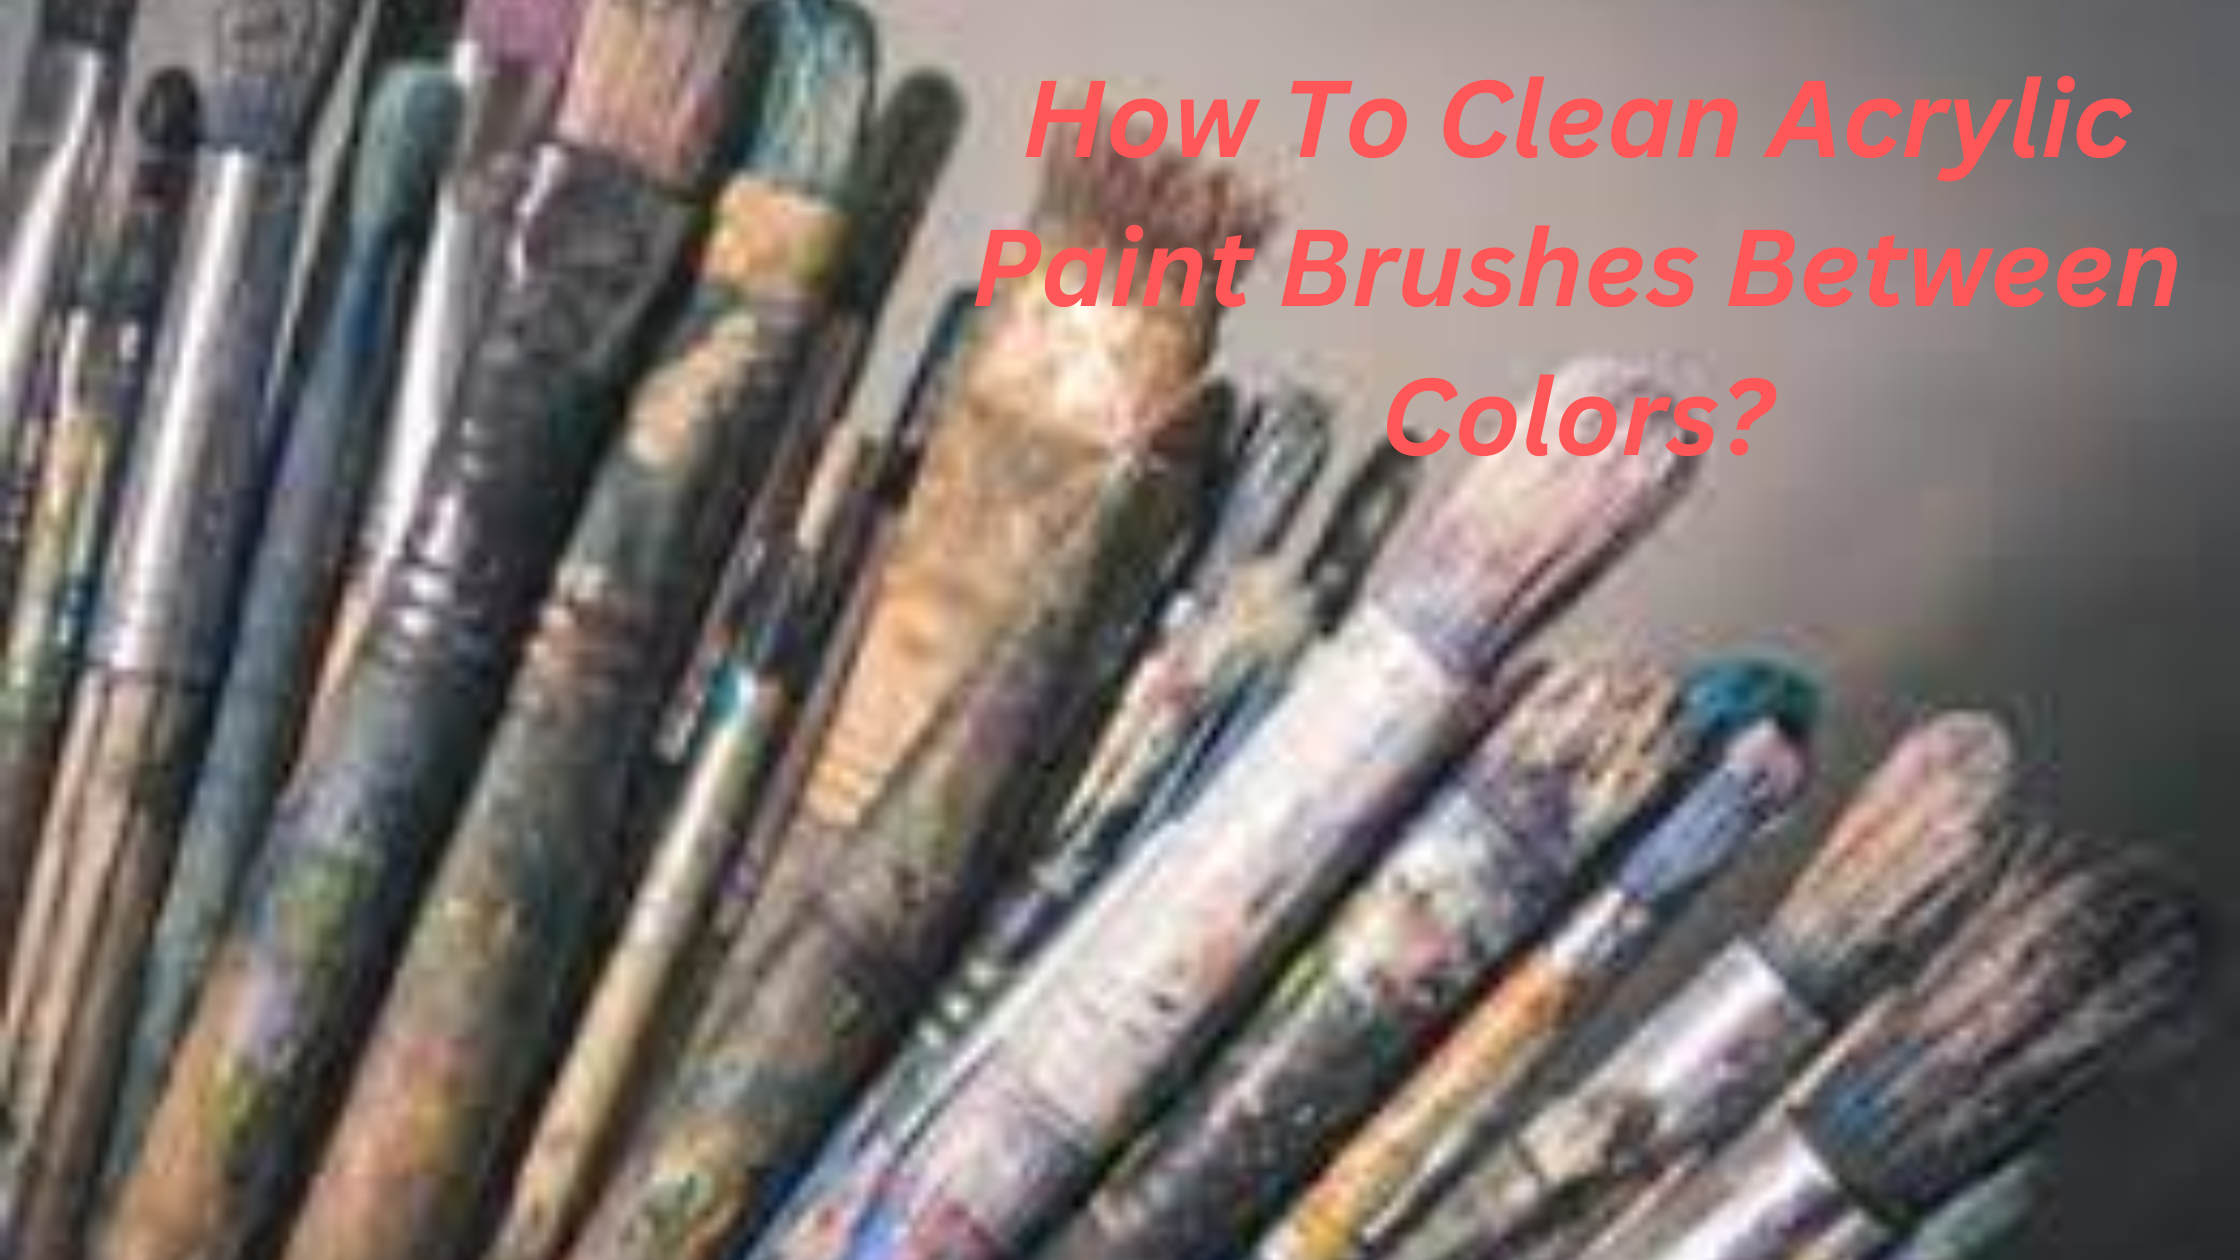 How To Clean Acrylic Paint Brushes Between Colors?